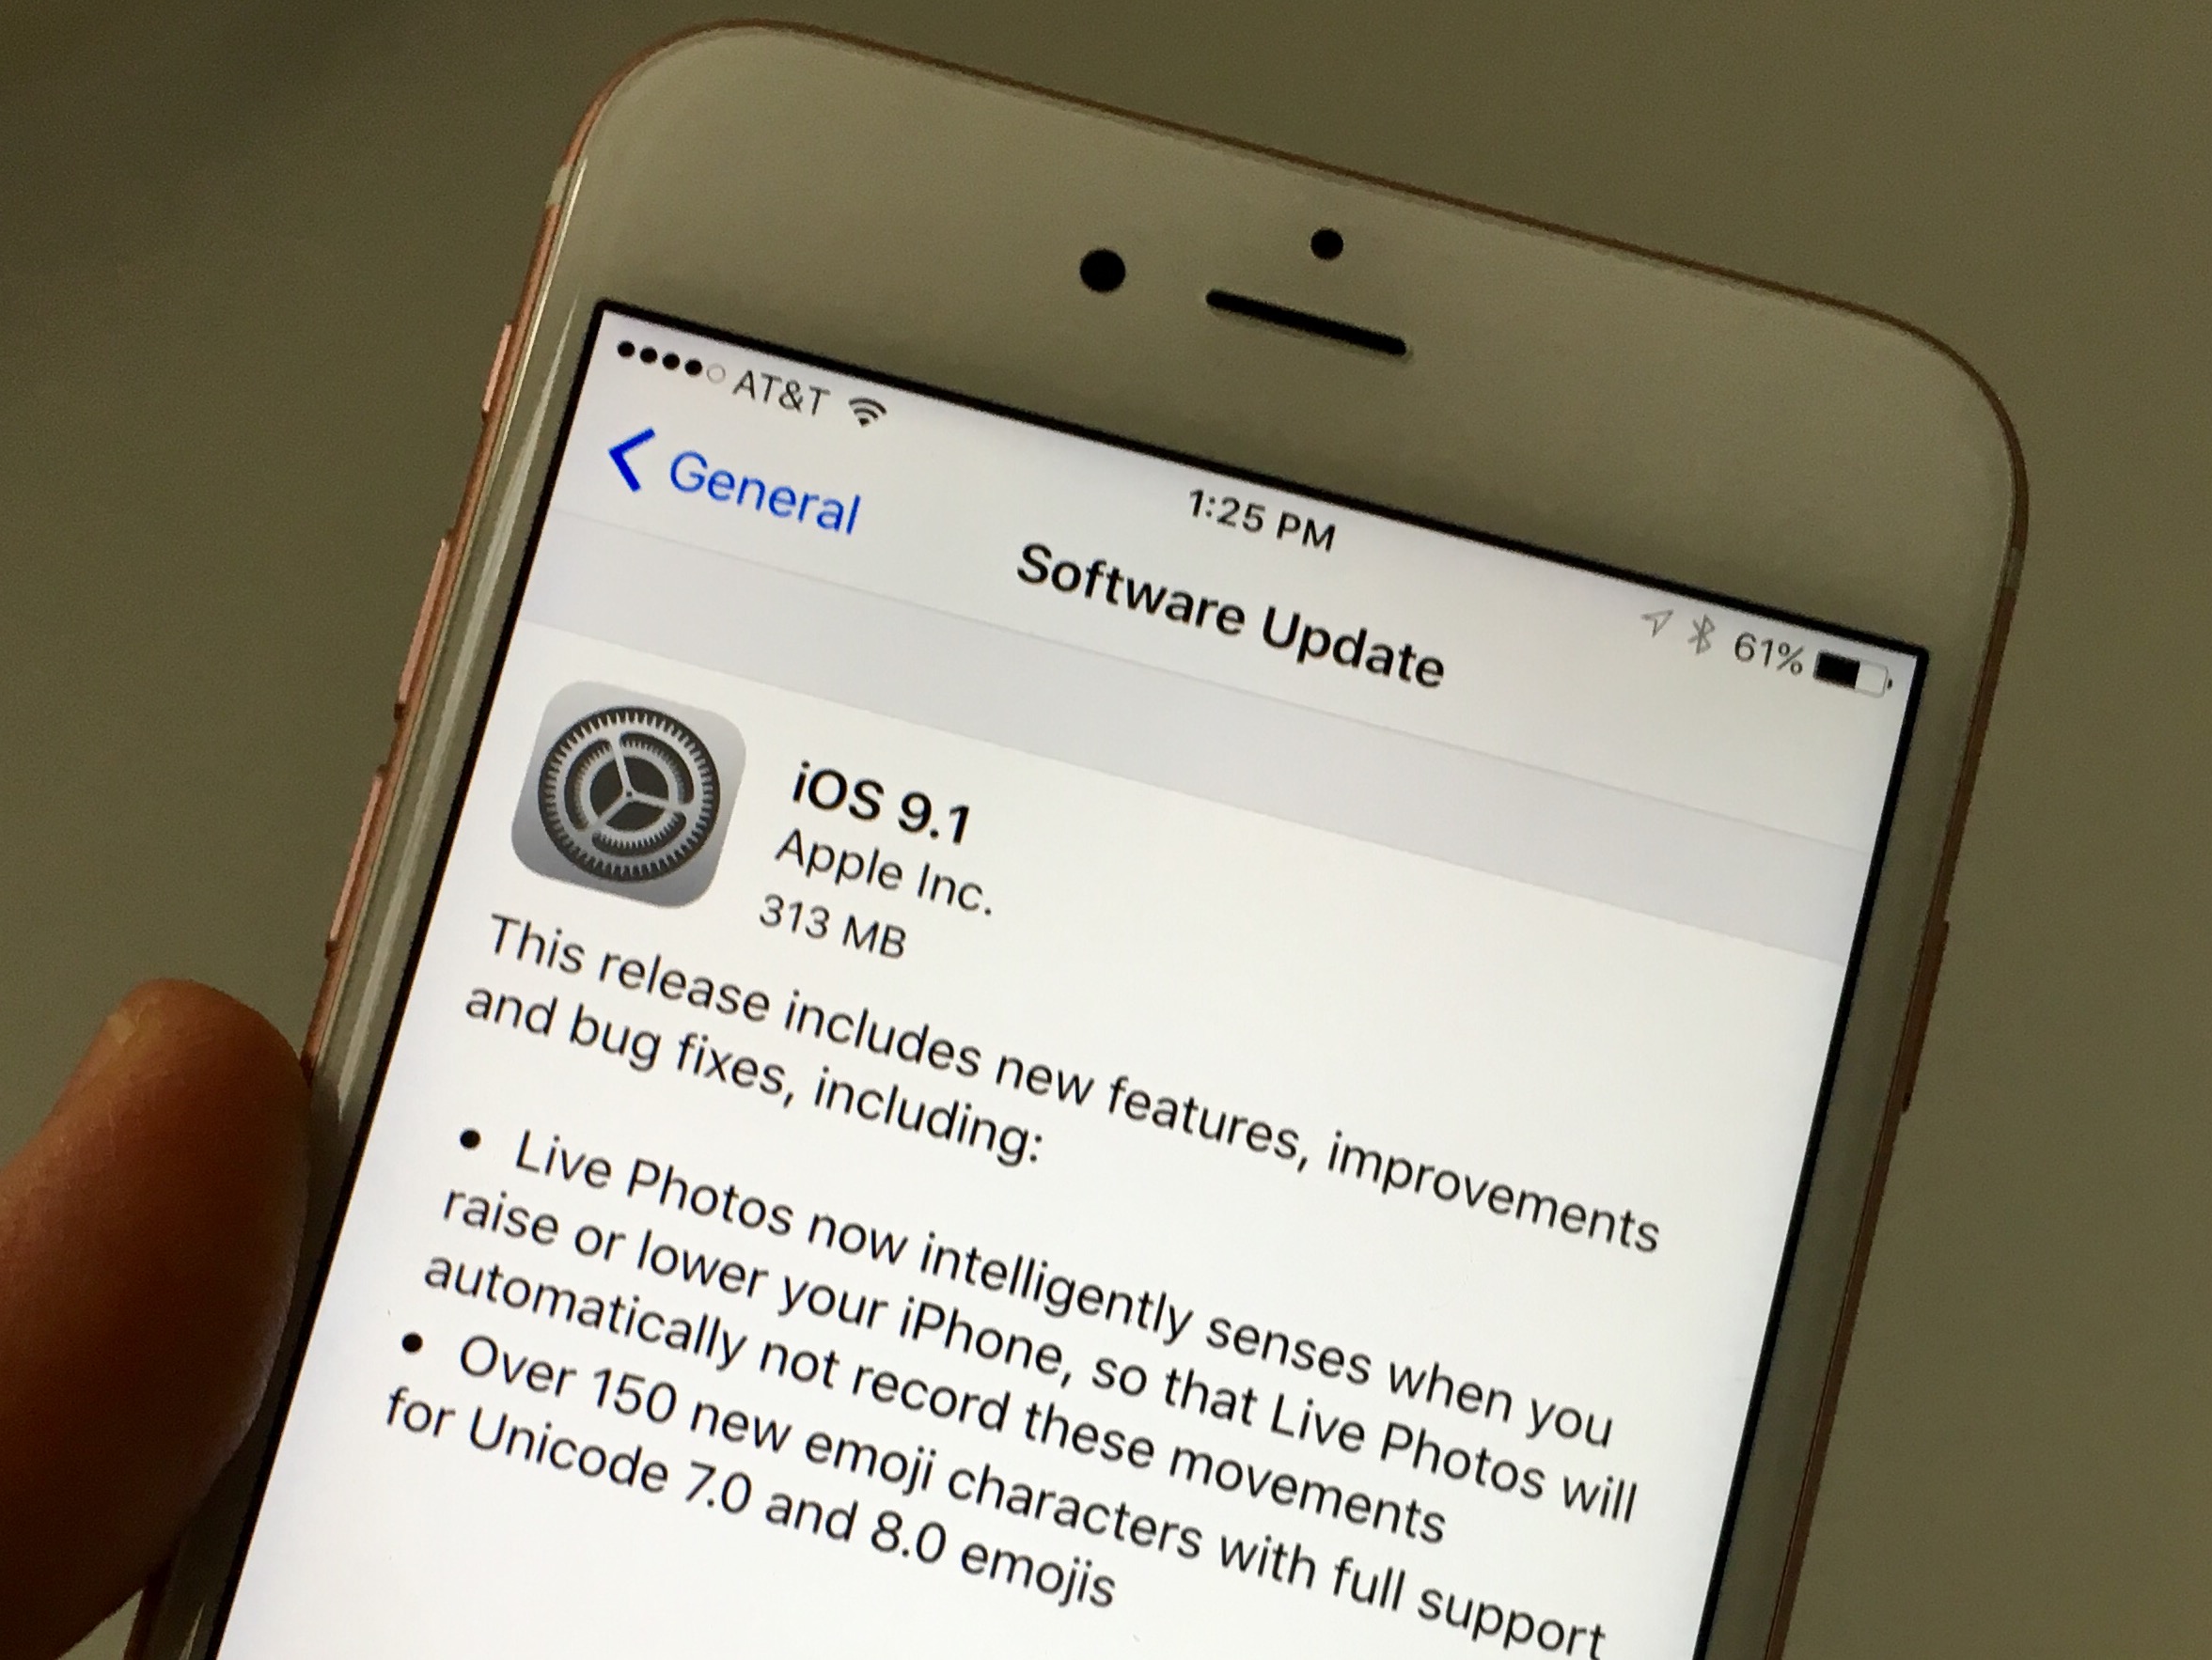 The iOS 9.1 release date arrives with fixes, Emoji and features.